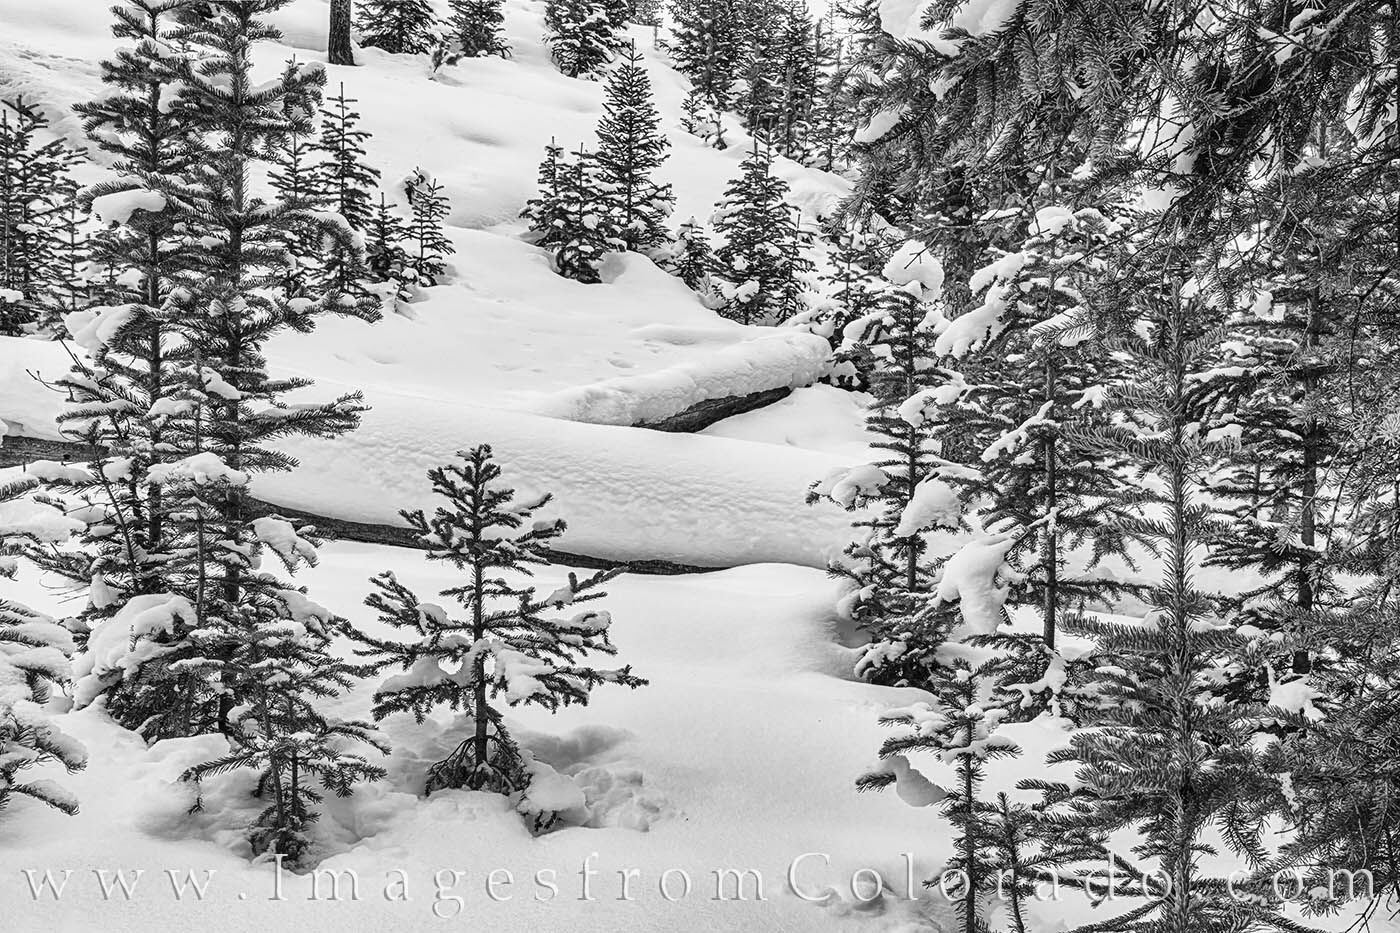 After a late December snowfall, the pine trees of the forest near Winter Park, Colorado, were covered in white powder. This snowy...